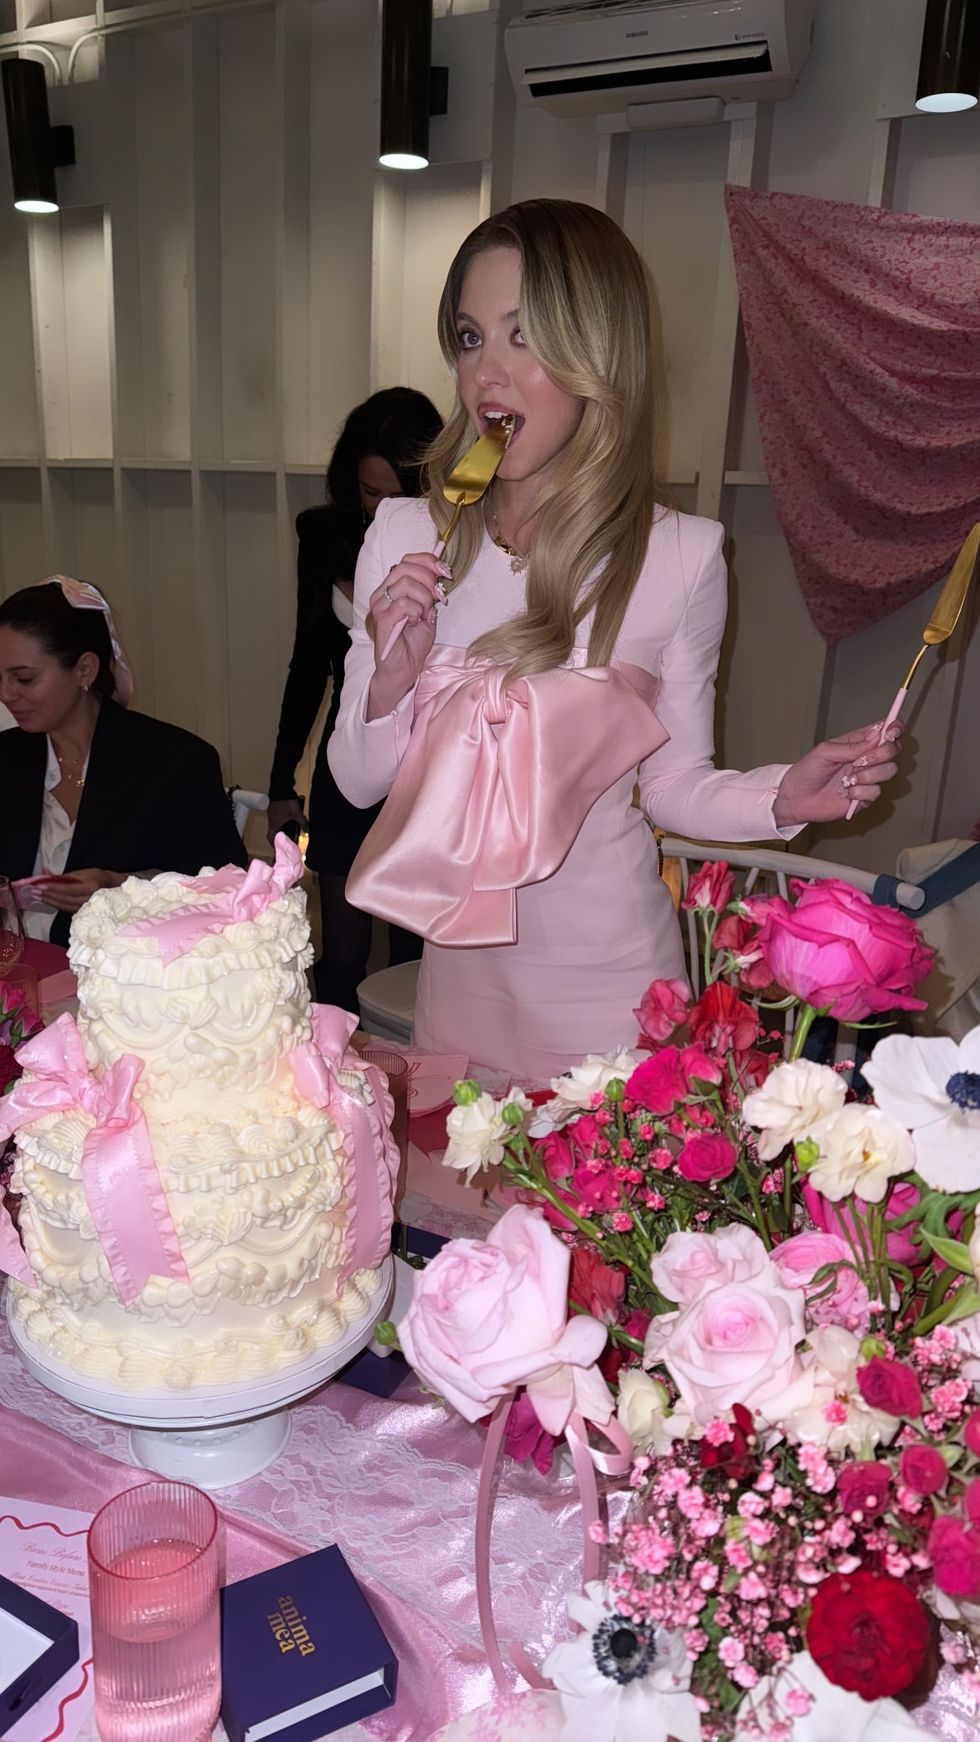 A person in a wedding dress holds a knife and cake